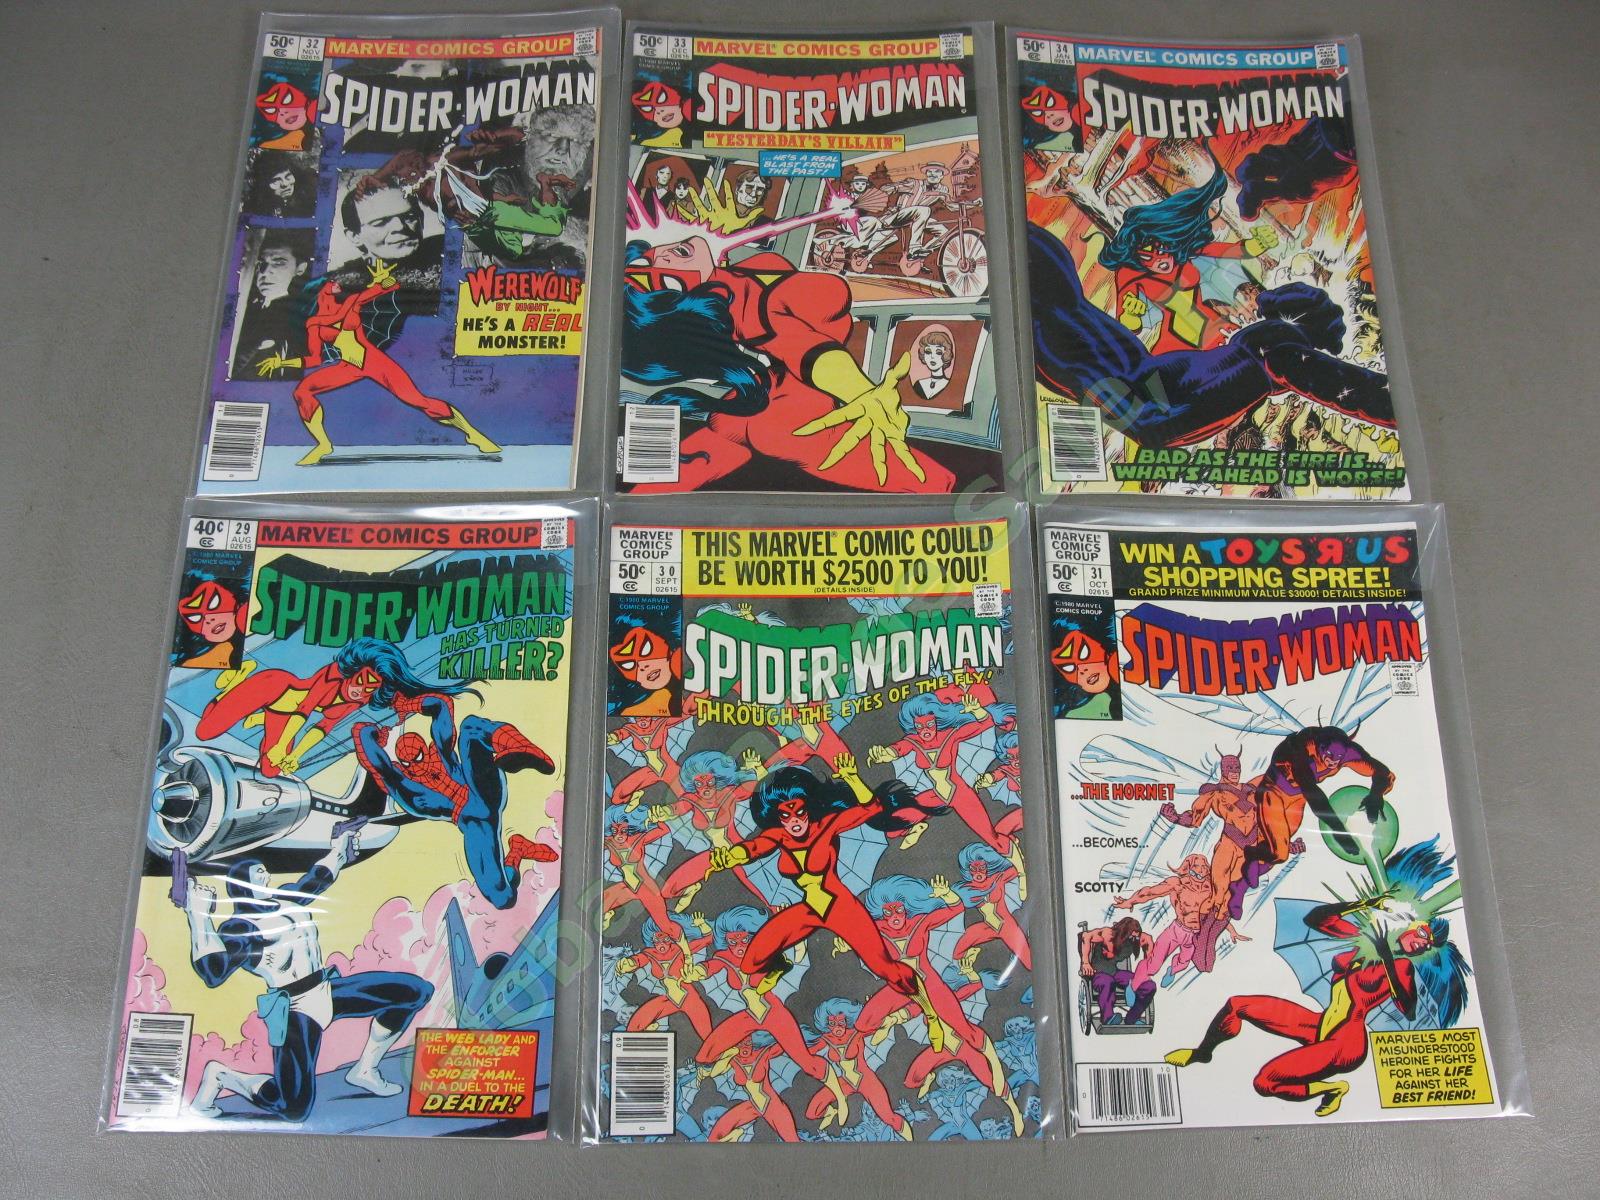 48 Vtg Marvel Spider-Woman Comic Book Collection Lot Runs 1-8 10-36 38-40 42-50 11